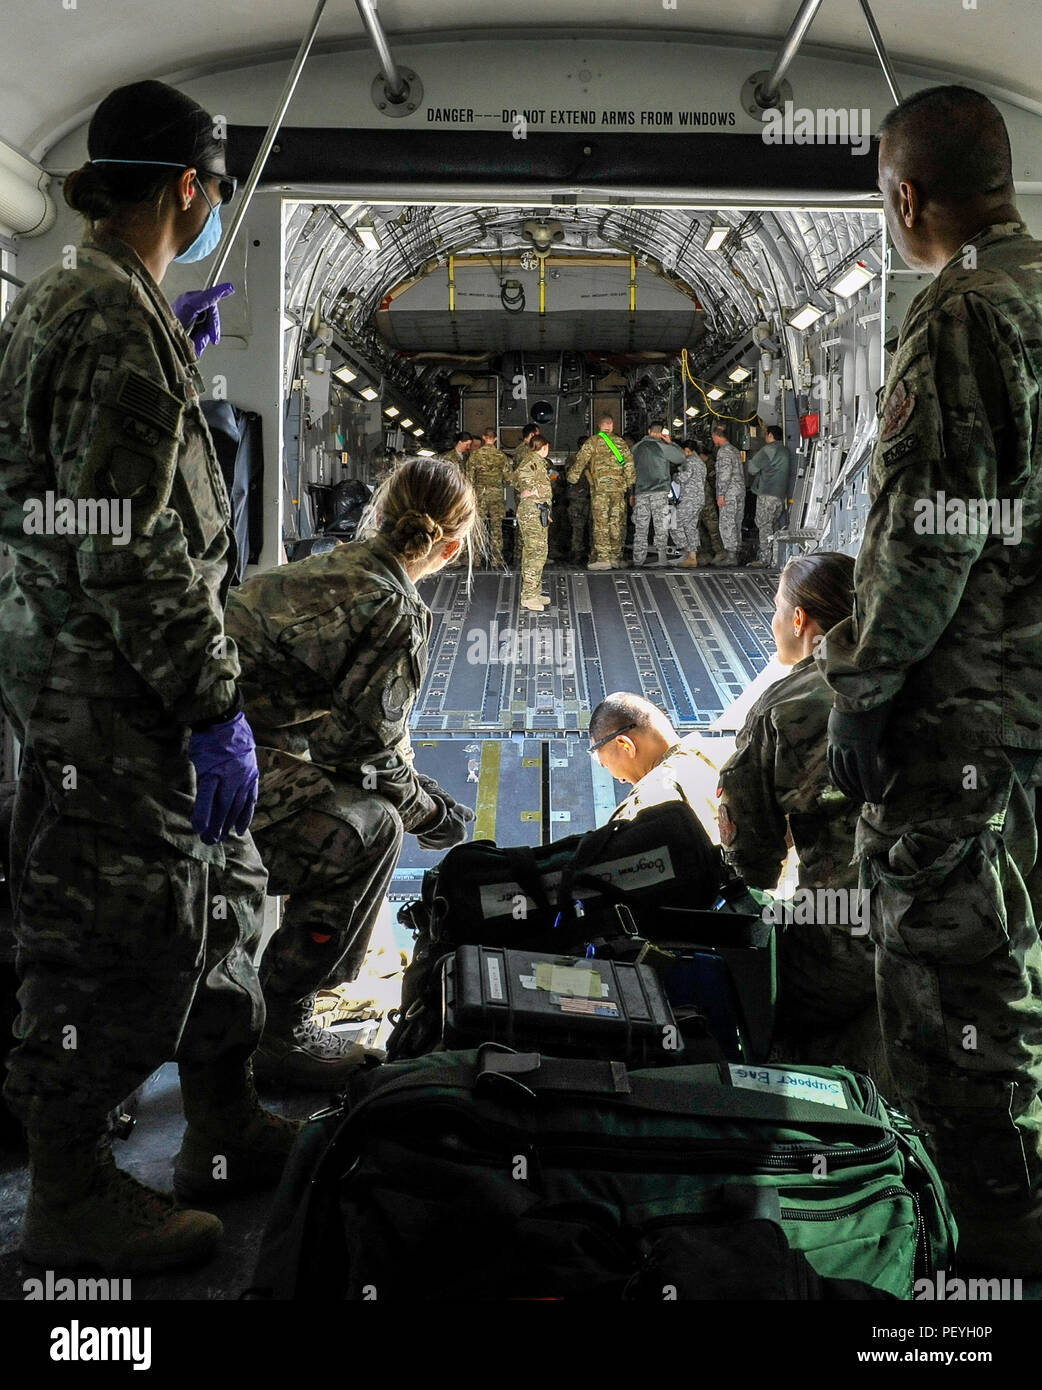 A 455th Expeditionary Medical Group team prepares to load the remaining equipment used to save the life of a NATO ally, who required Extracorporeal Membrane Oxygenation team support, onto an aeromedical evacuation transport at Bagram Air Field, Afghanistan, on Feb. 18, 2016. The ECMO team, dispatched from San Antonio Military Medical Center, uses technology that bypasses the lungs and infuses the blood directly with oxygen, while removing the harmful carbon dioxide from the blood stream. The patient was airlifted to Landstuhl Regional Medical Center, Germany, where he will receive 7 to 14 days Stock Photo